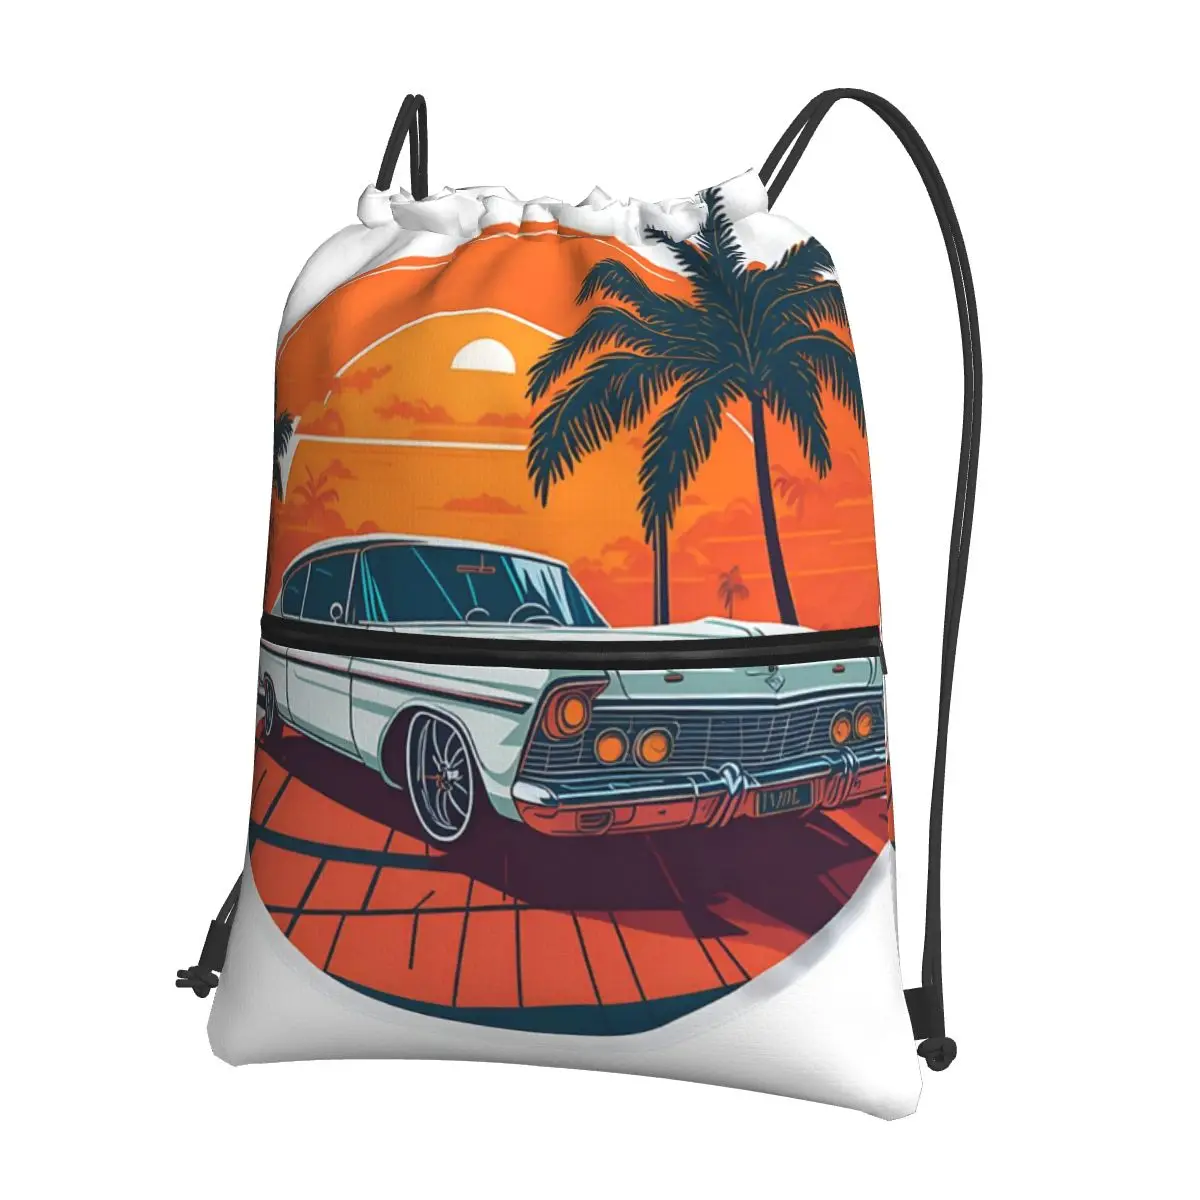 

A Beautiful Classic Car In Miami Street Portable Backpacks Drawstring Bag Drawstring Bundle Pocket Shoes Bags For Travel Sport